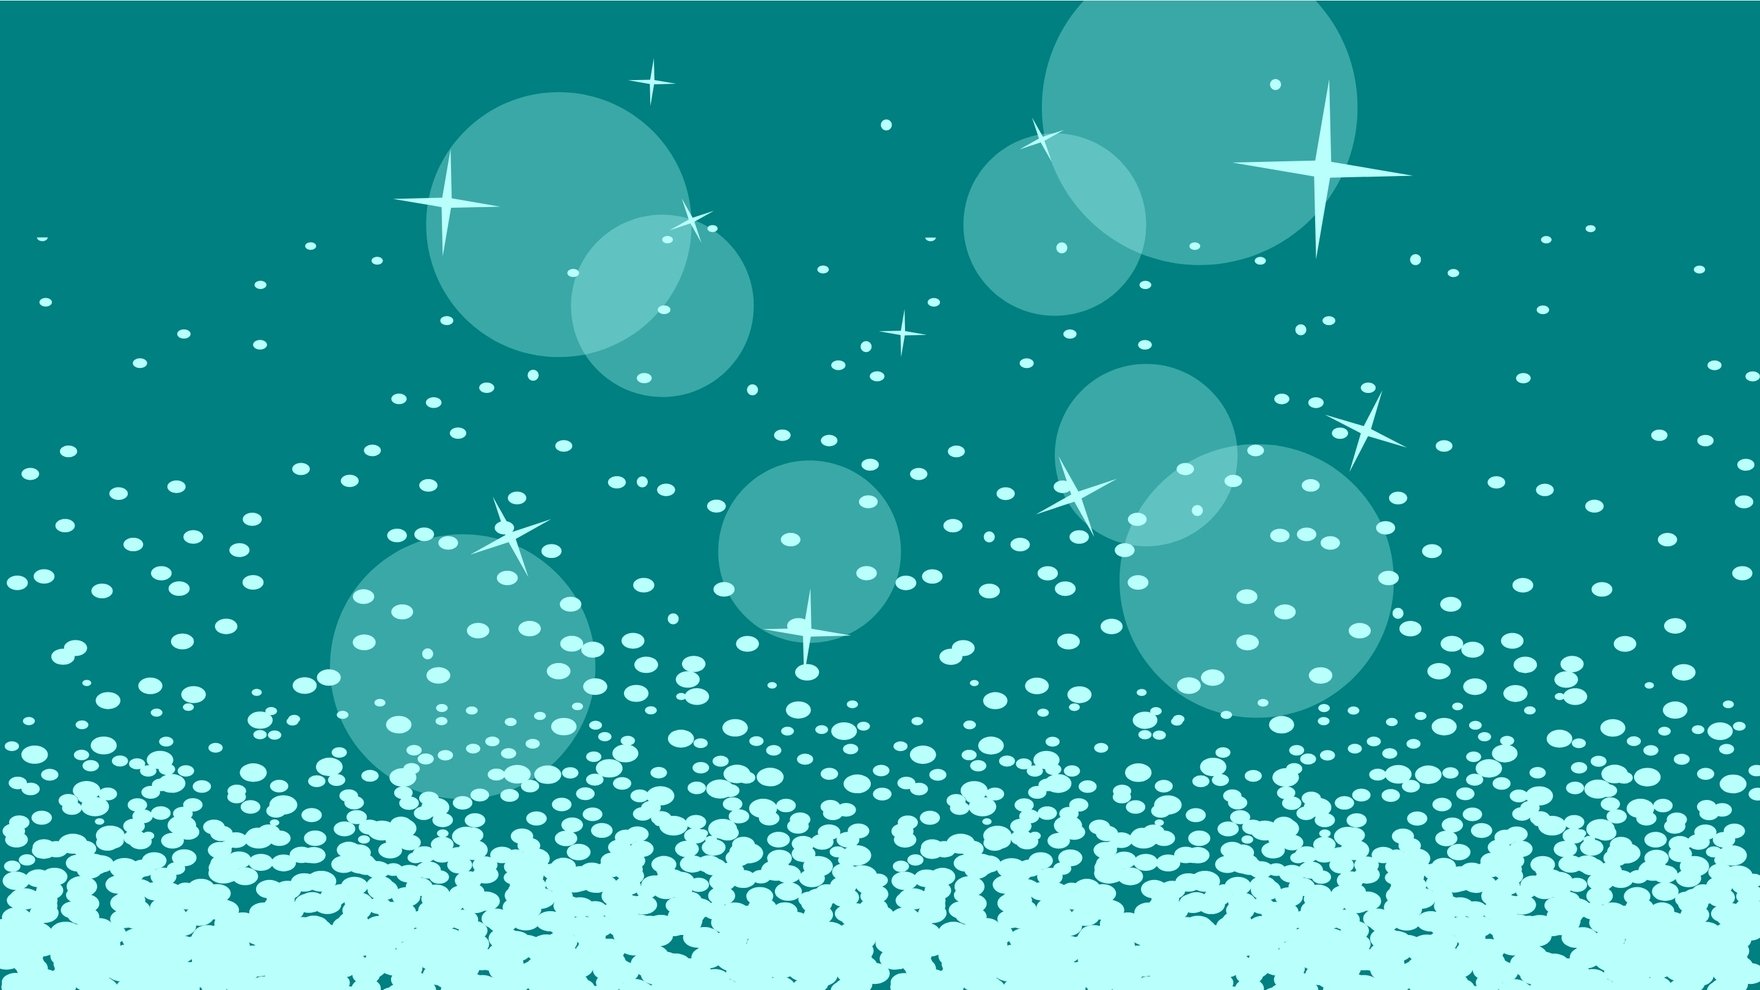 Teal Background - Images, HD, Free, Download 